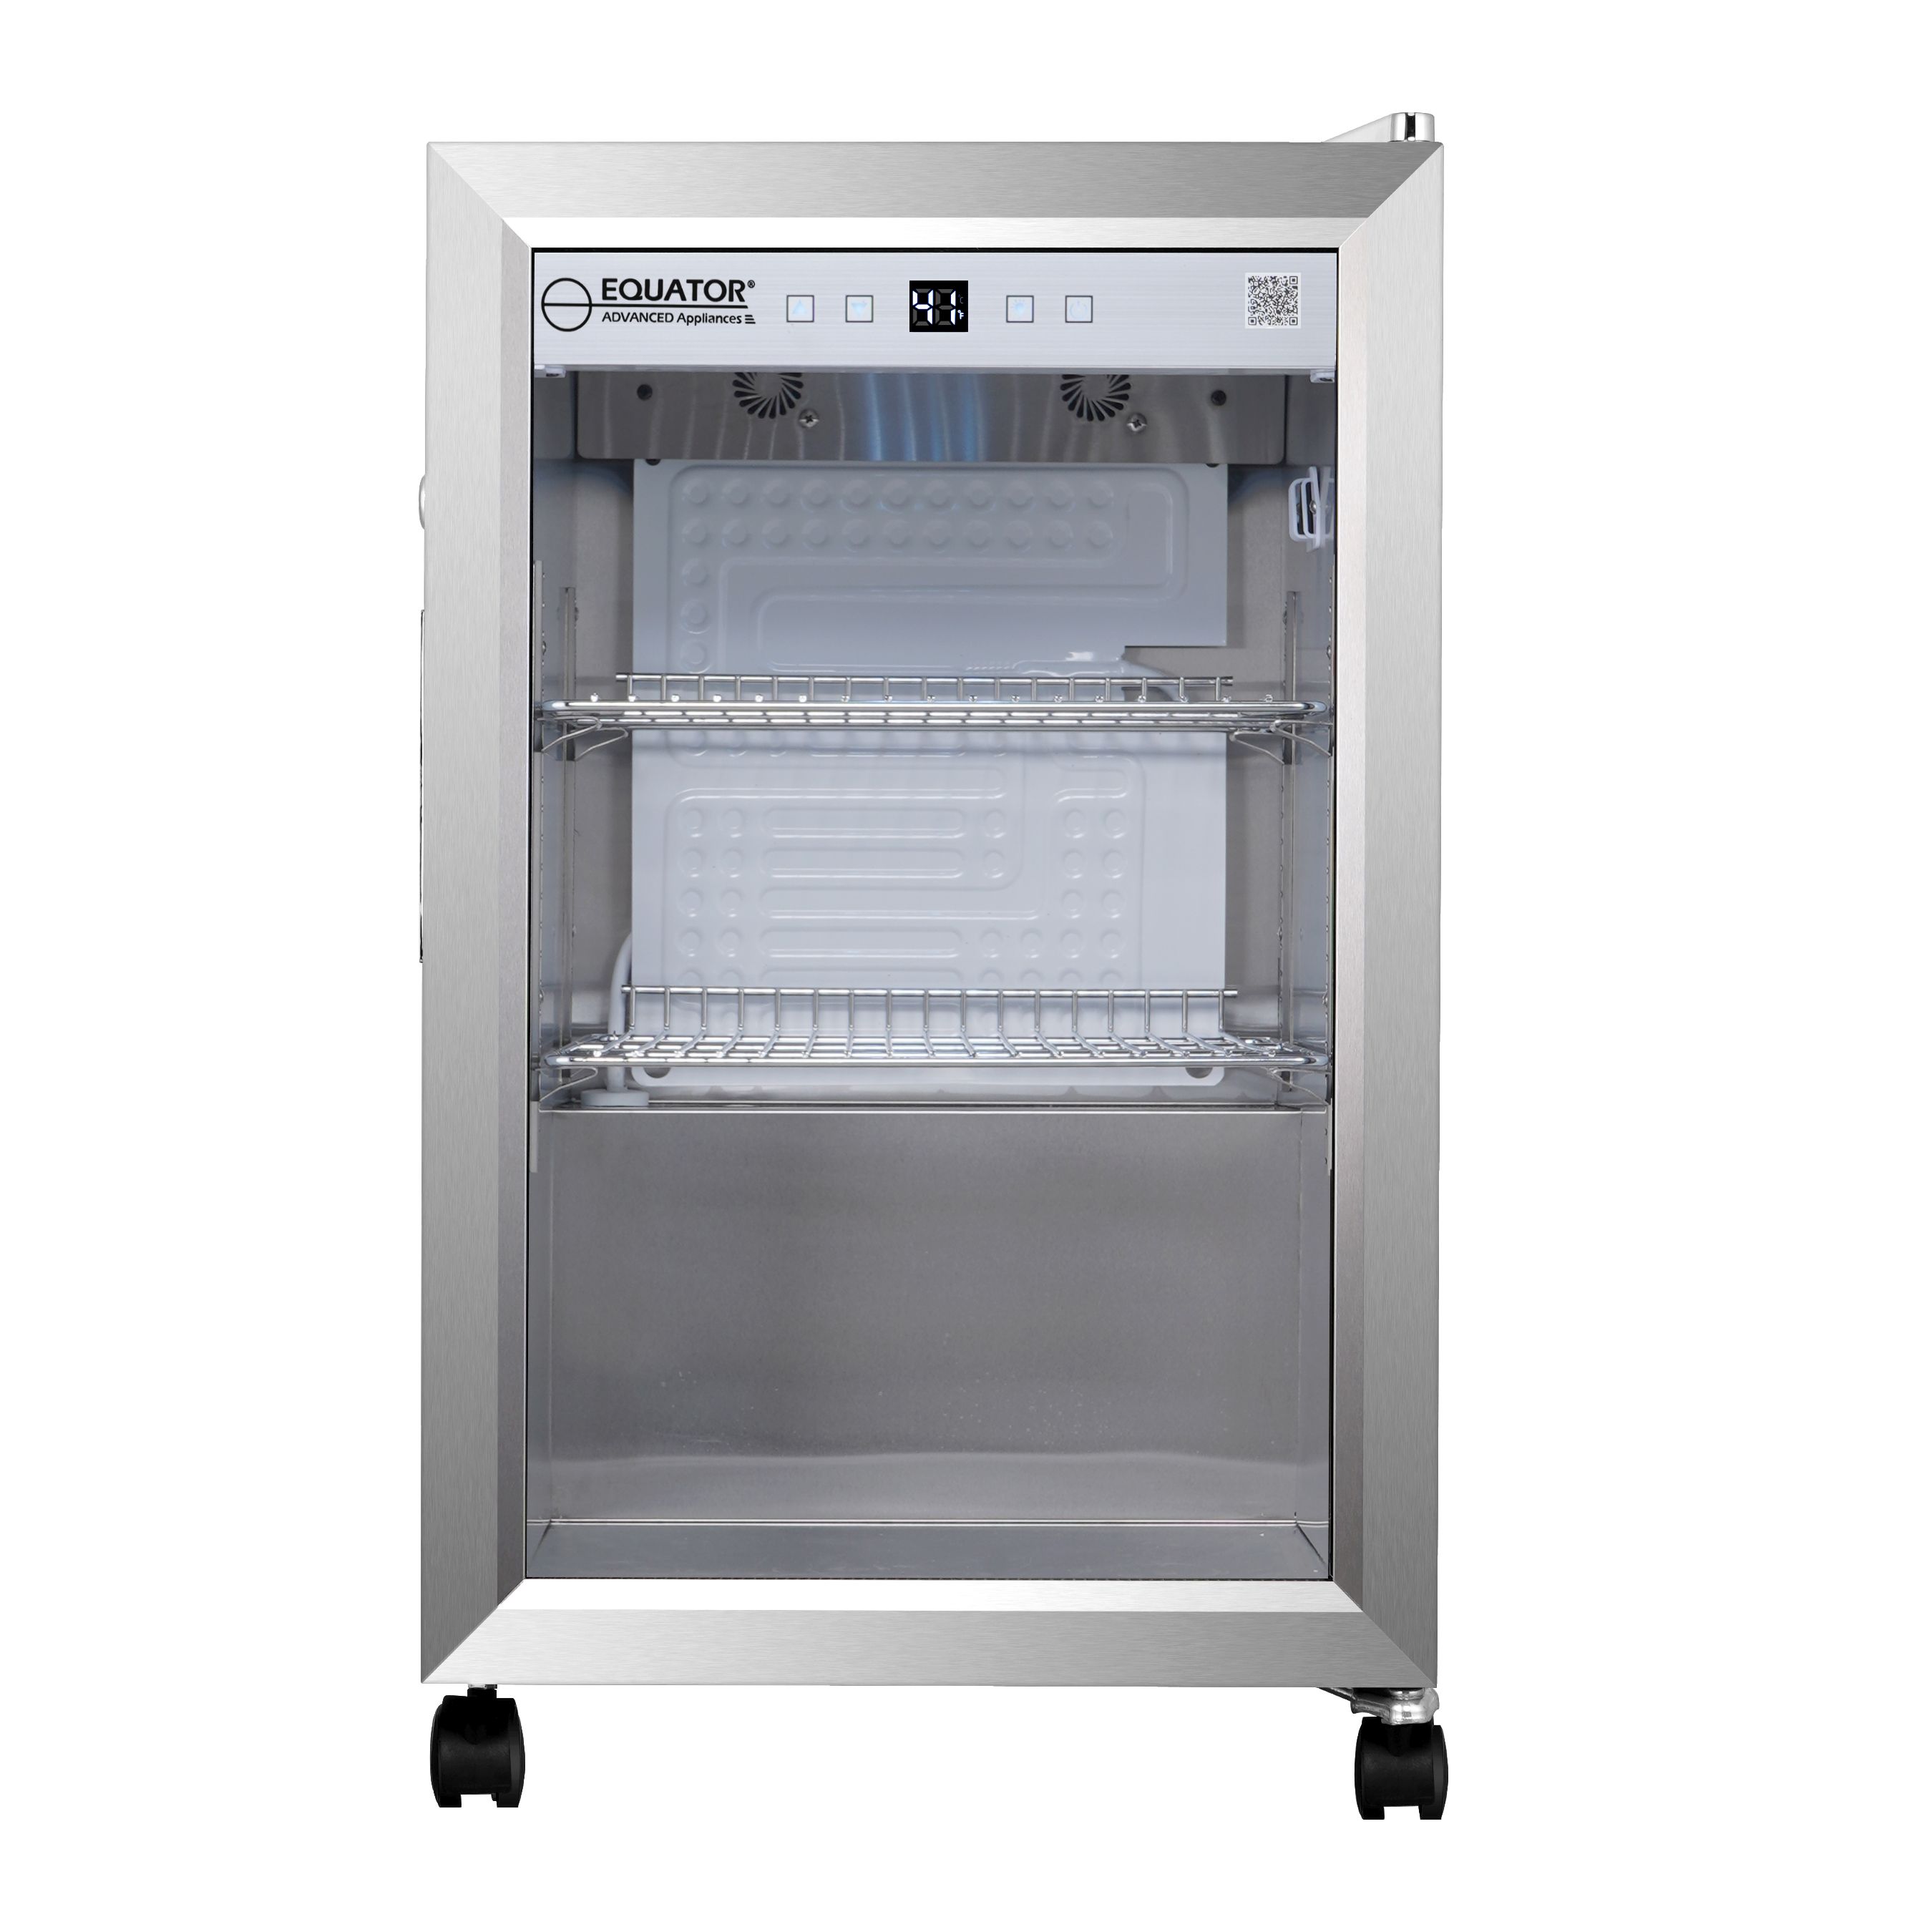 Picture of Equator Advanced Appliances OR 230 Equator Advanced Appliances OR230 Outdoor Refrigerator